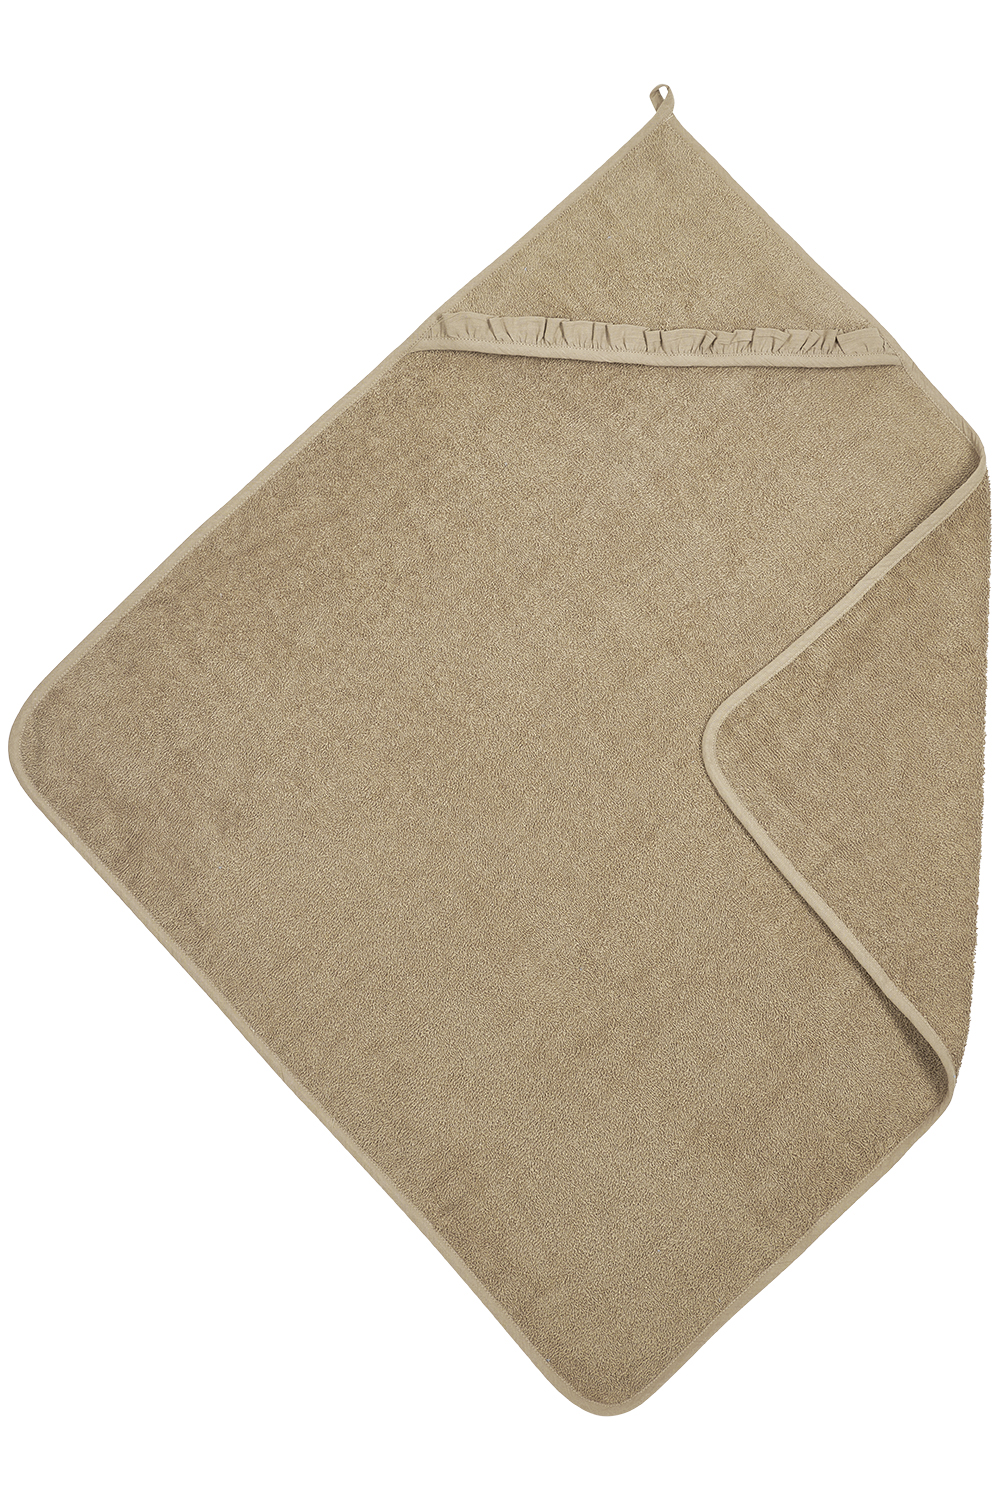 Kapuzentuch frottee Ruffle - taupe - 80x80cm